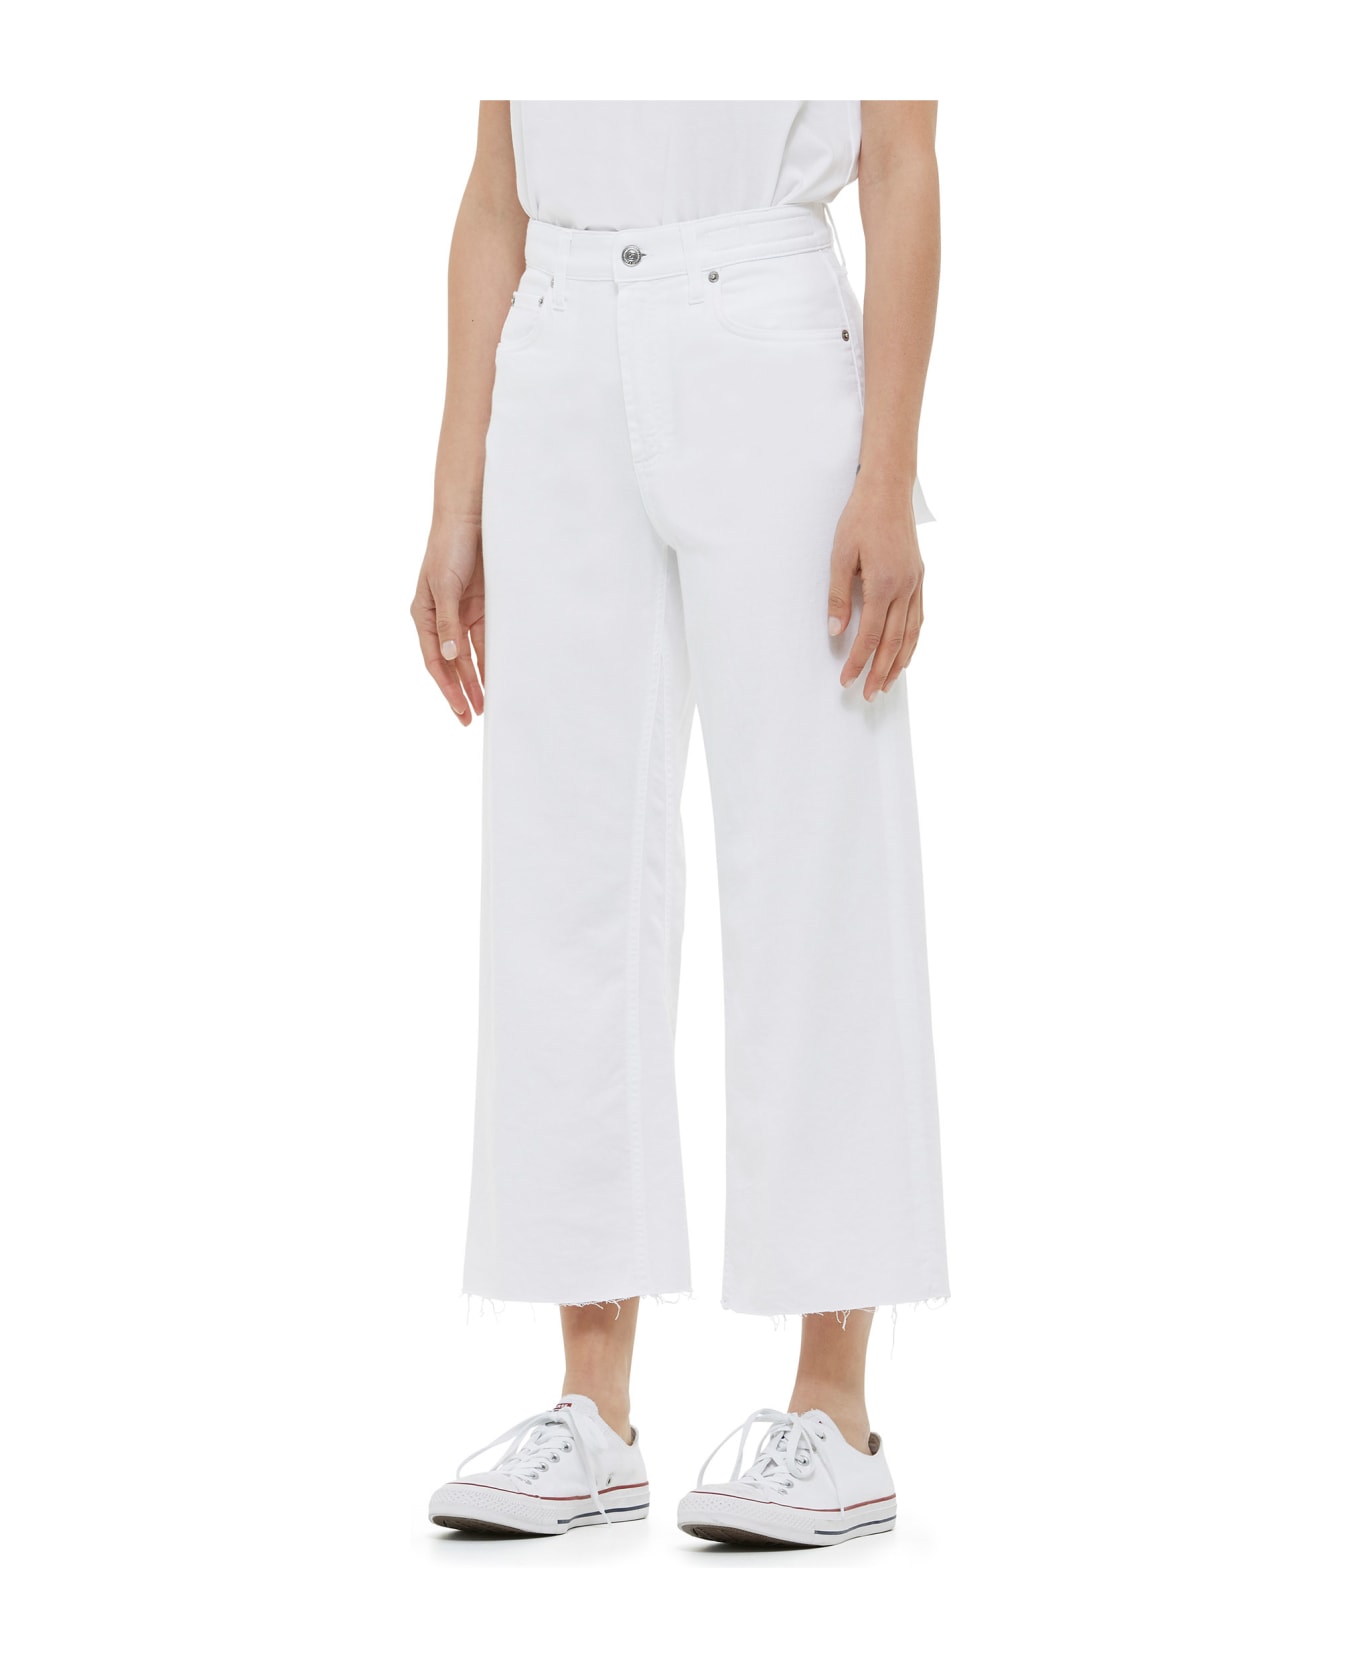 Department Five SPEAR Wide-leg cropped trousers - BIANCO OTTICO